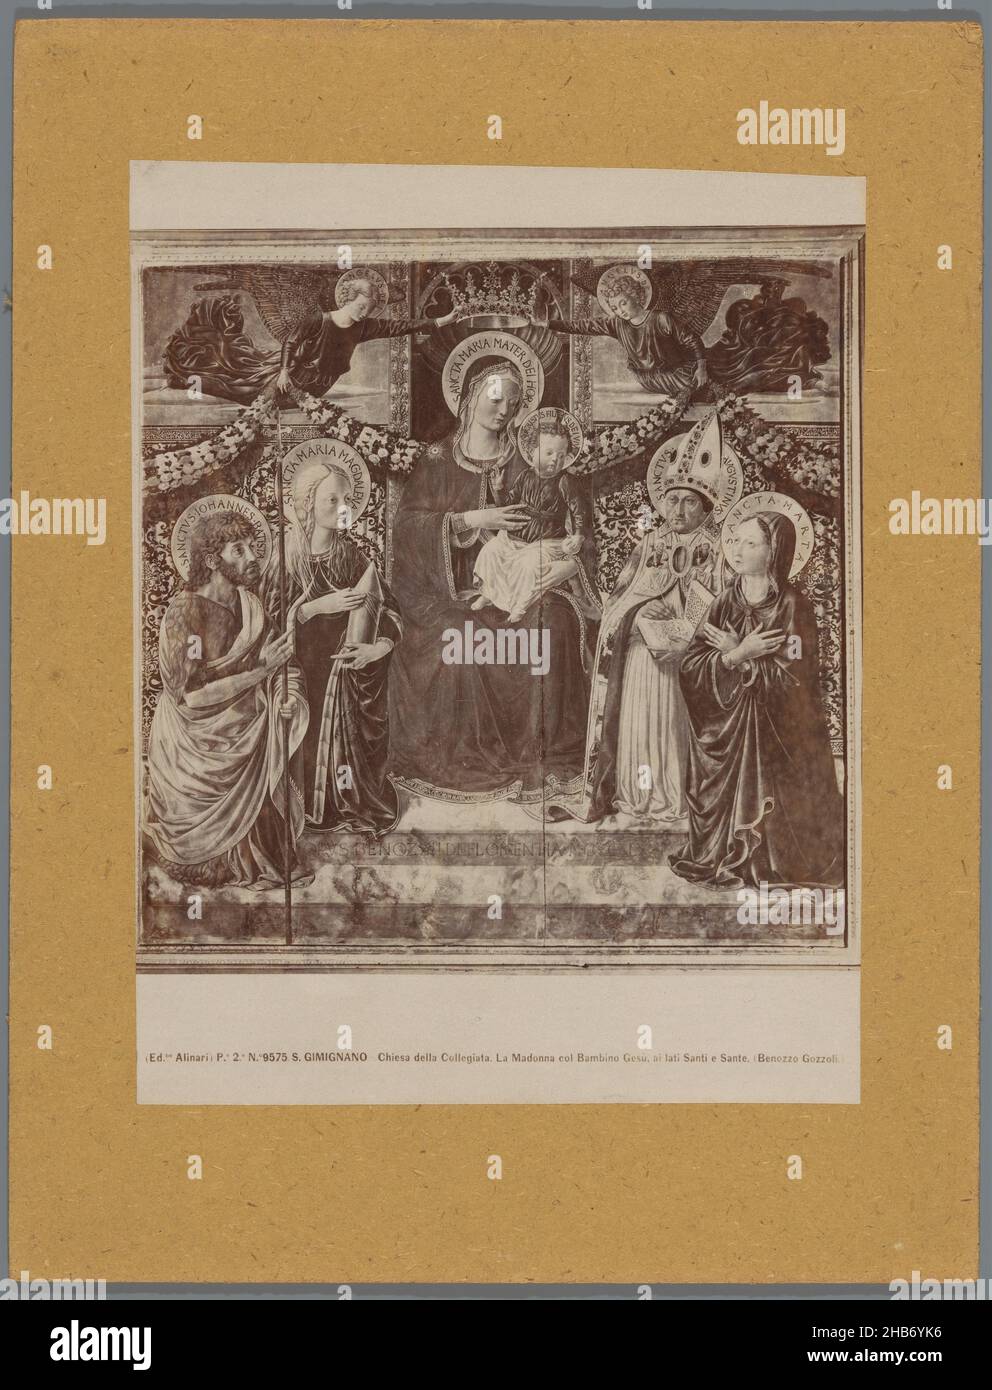 Photoreproduction of a painting by B. Gozzoli, depicting Mary with Child between Saints and Angels, S. GIMIGNANO Chiesa della Collegiata. La Madonna col Bambino Gesù, ai lati Santi e Sante. (title on object), Alinari (mentioned on object), after: Benozzo Gozzoli (mentioned on object), Collegiata Santa Maria Assuntaafter: Italy, c. 1875 - c. 1900, cardboard, albumen print, height 247 mm × width 190 mm Stock Photo